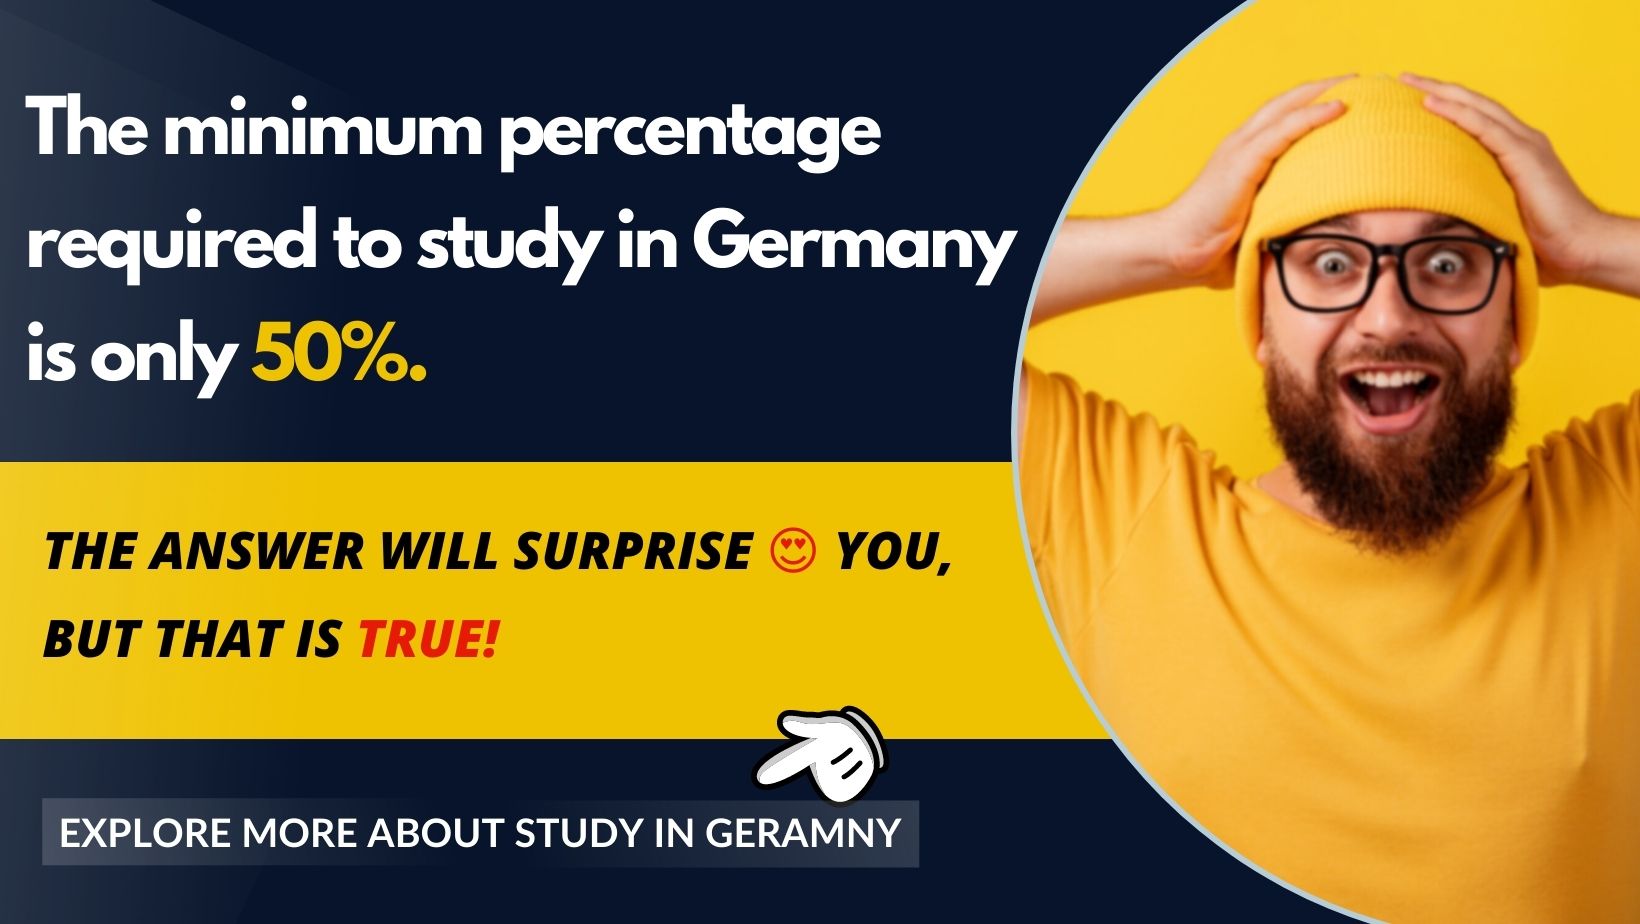 How much percentage is required to study in Germany?